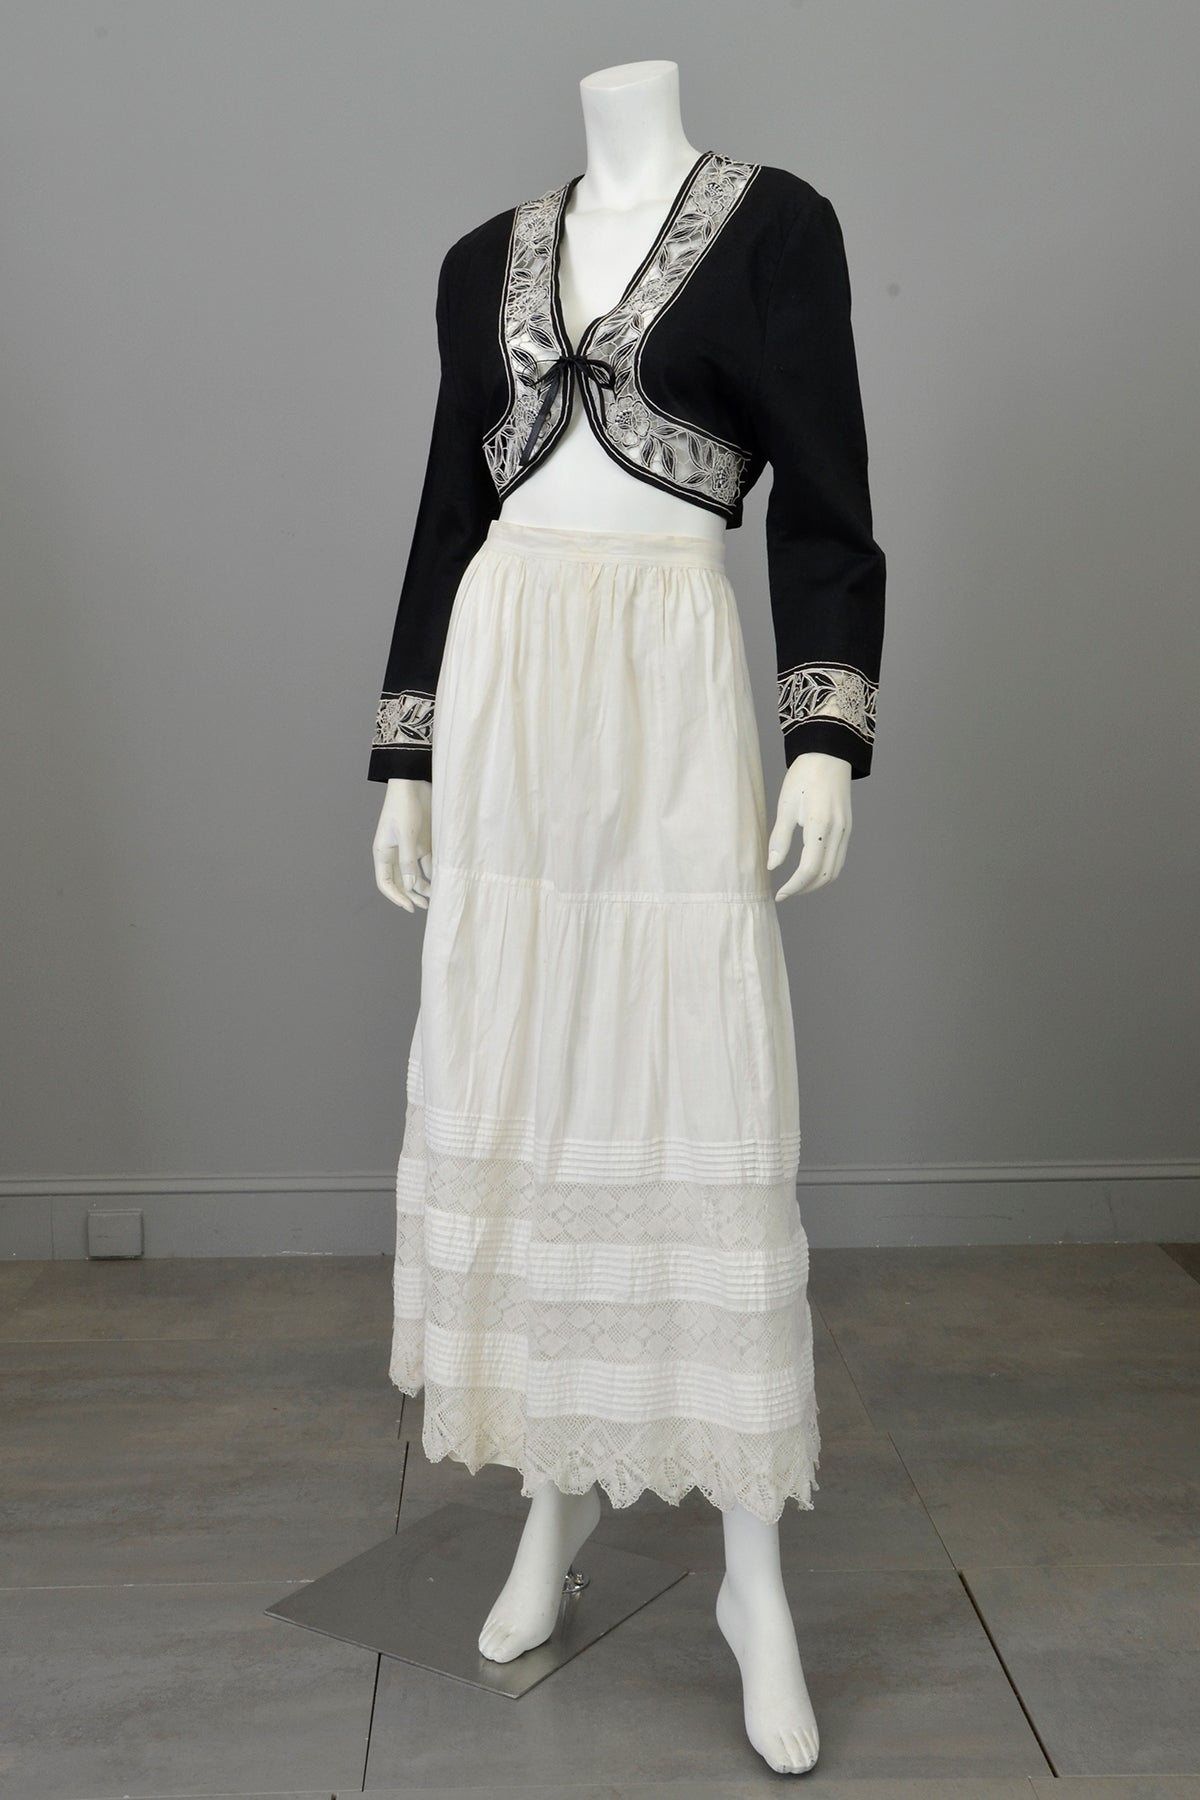 White Edwardian Petticoat Lawn Skirt with Tatted Lace Panels and Pintucking at Hem